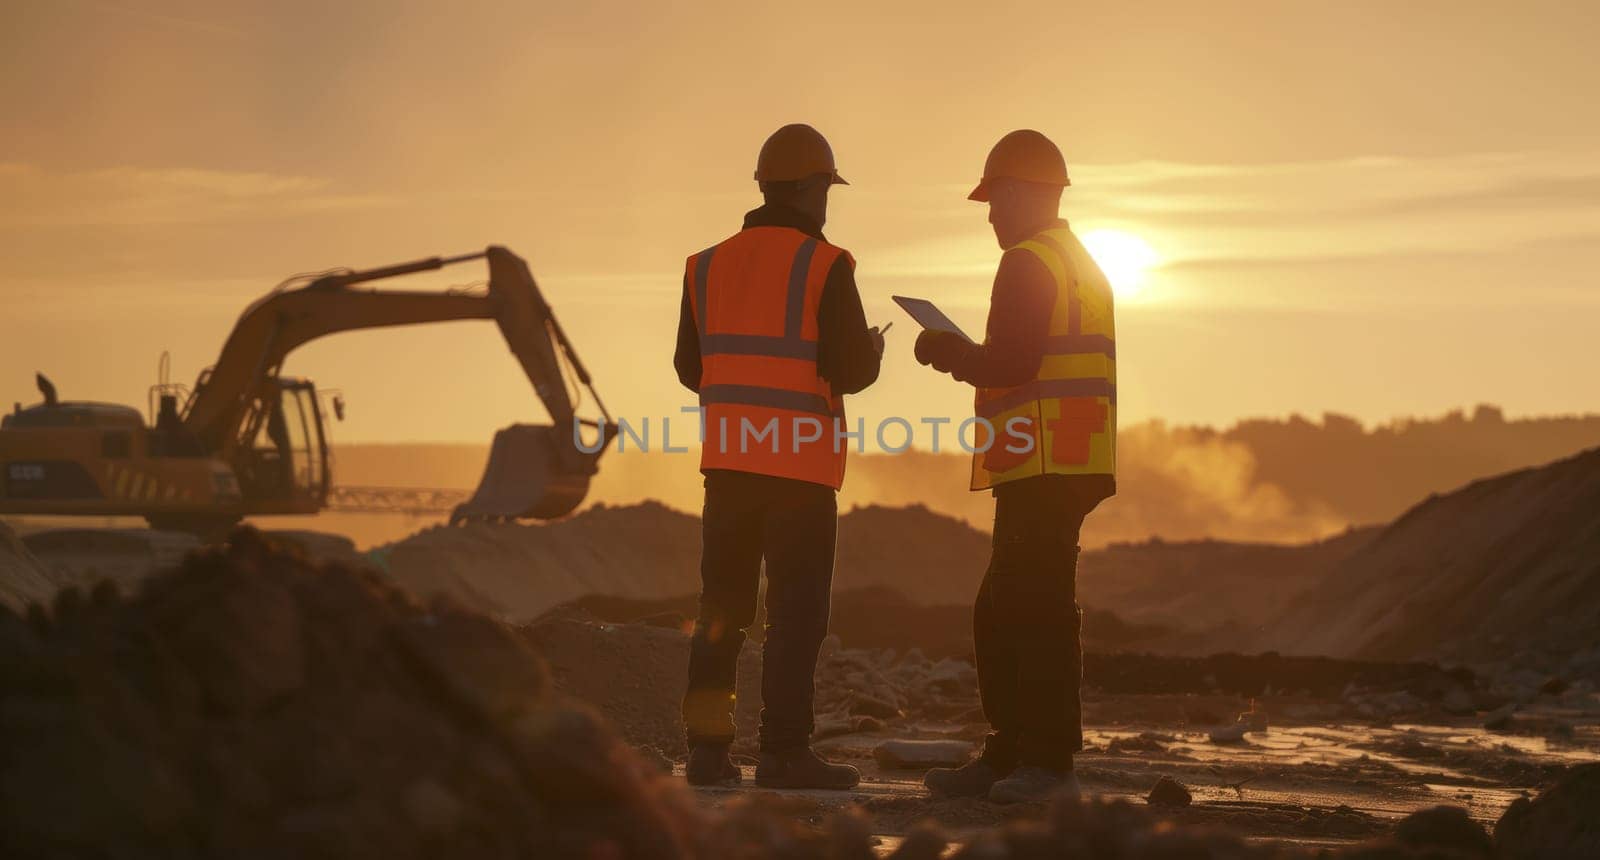 Construction workers enjoying the sunset view, looking at a tablet on the site by richwolf